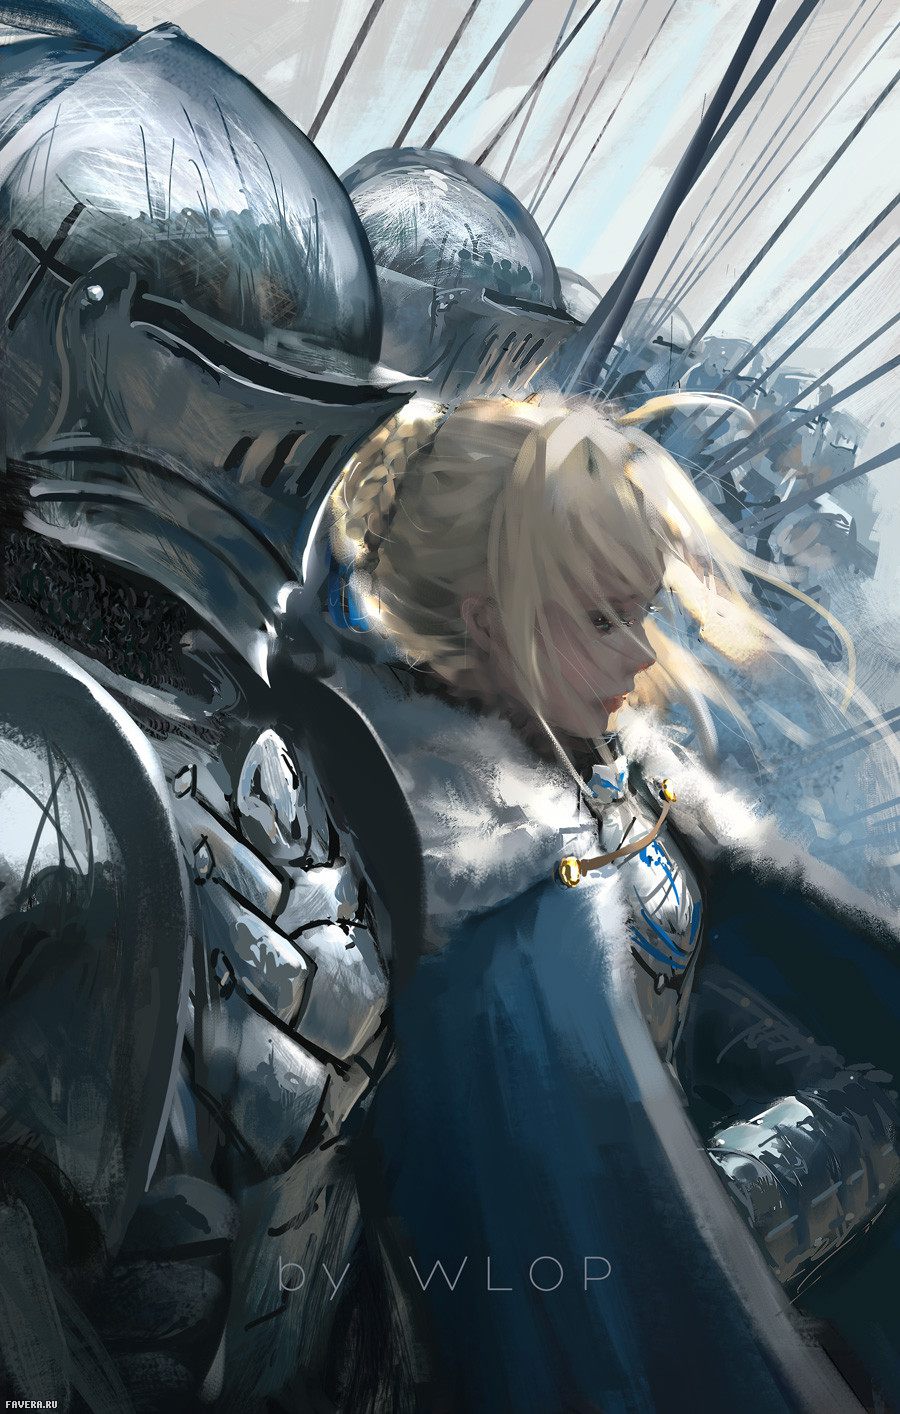 SABER fate by Wang Ling